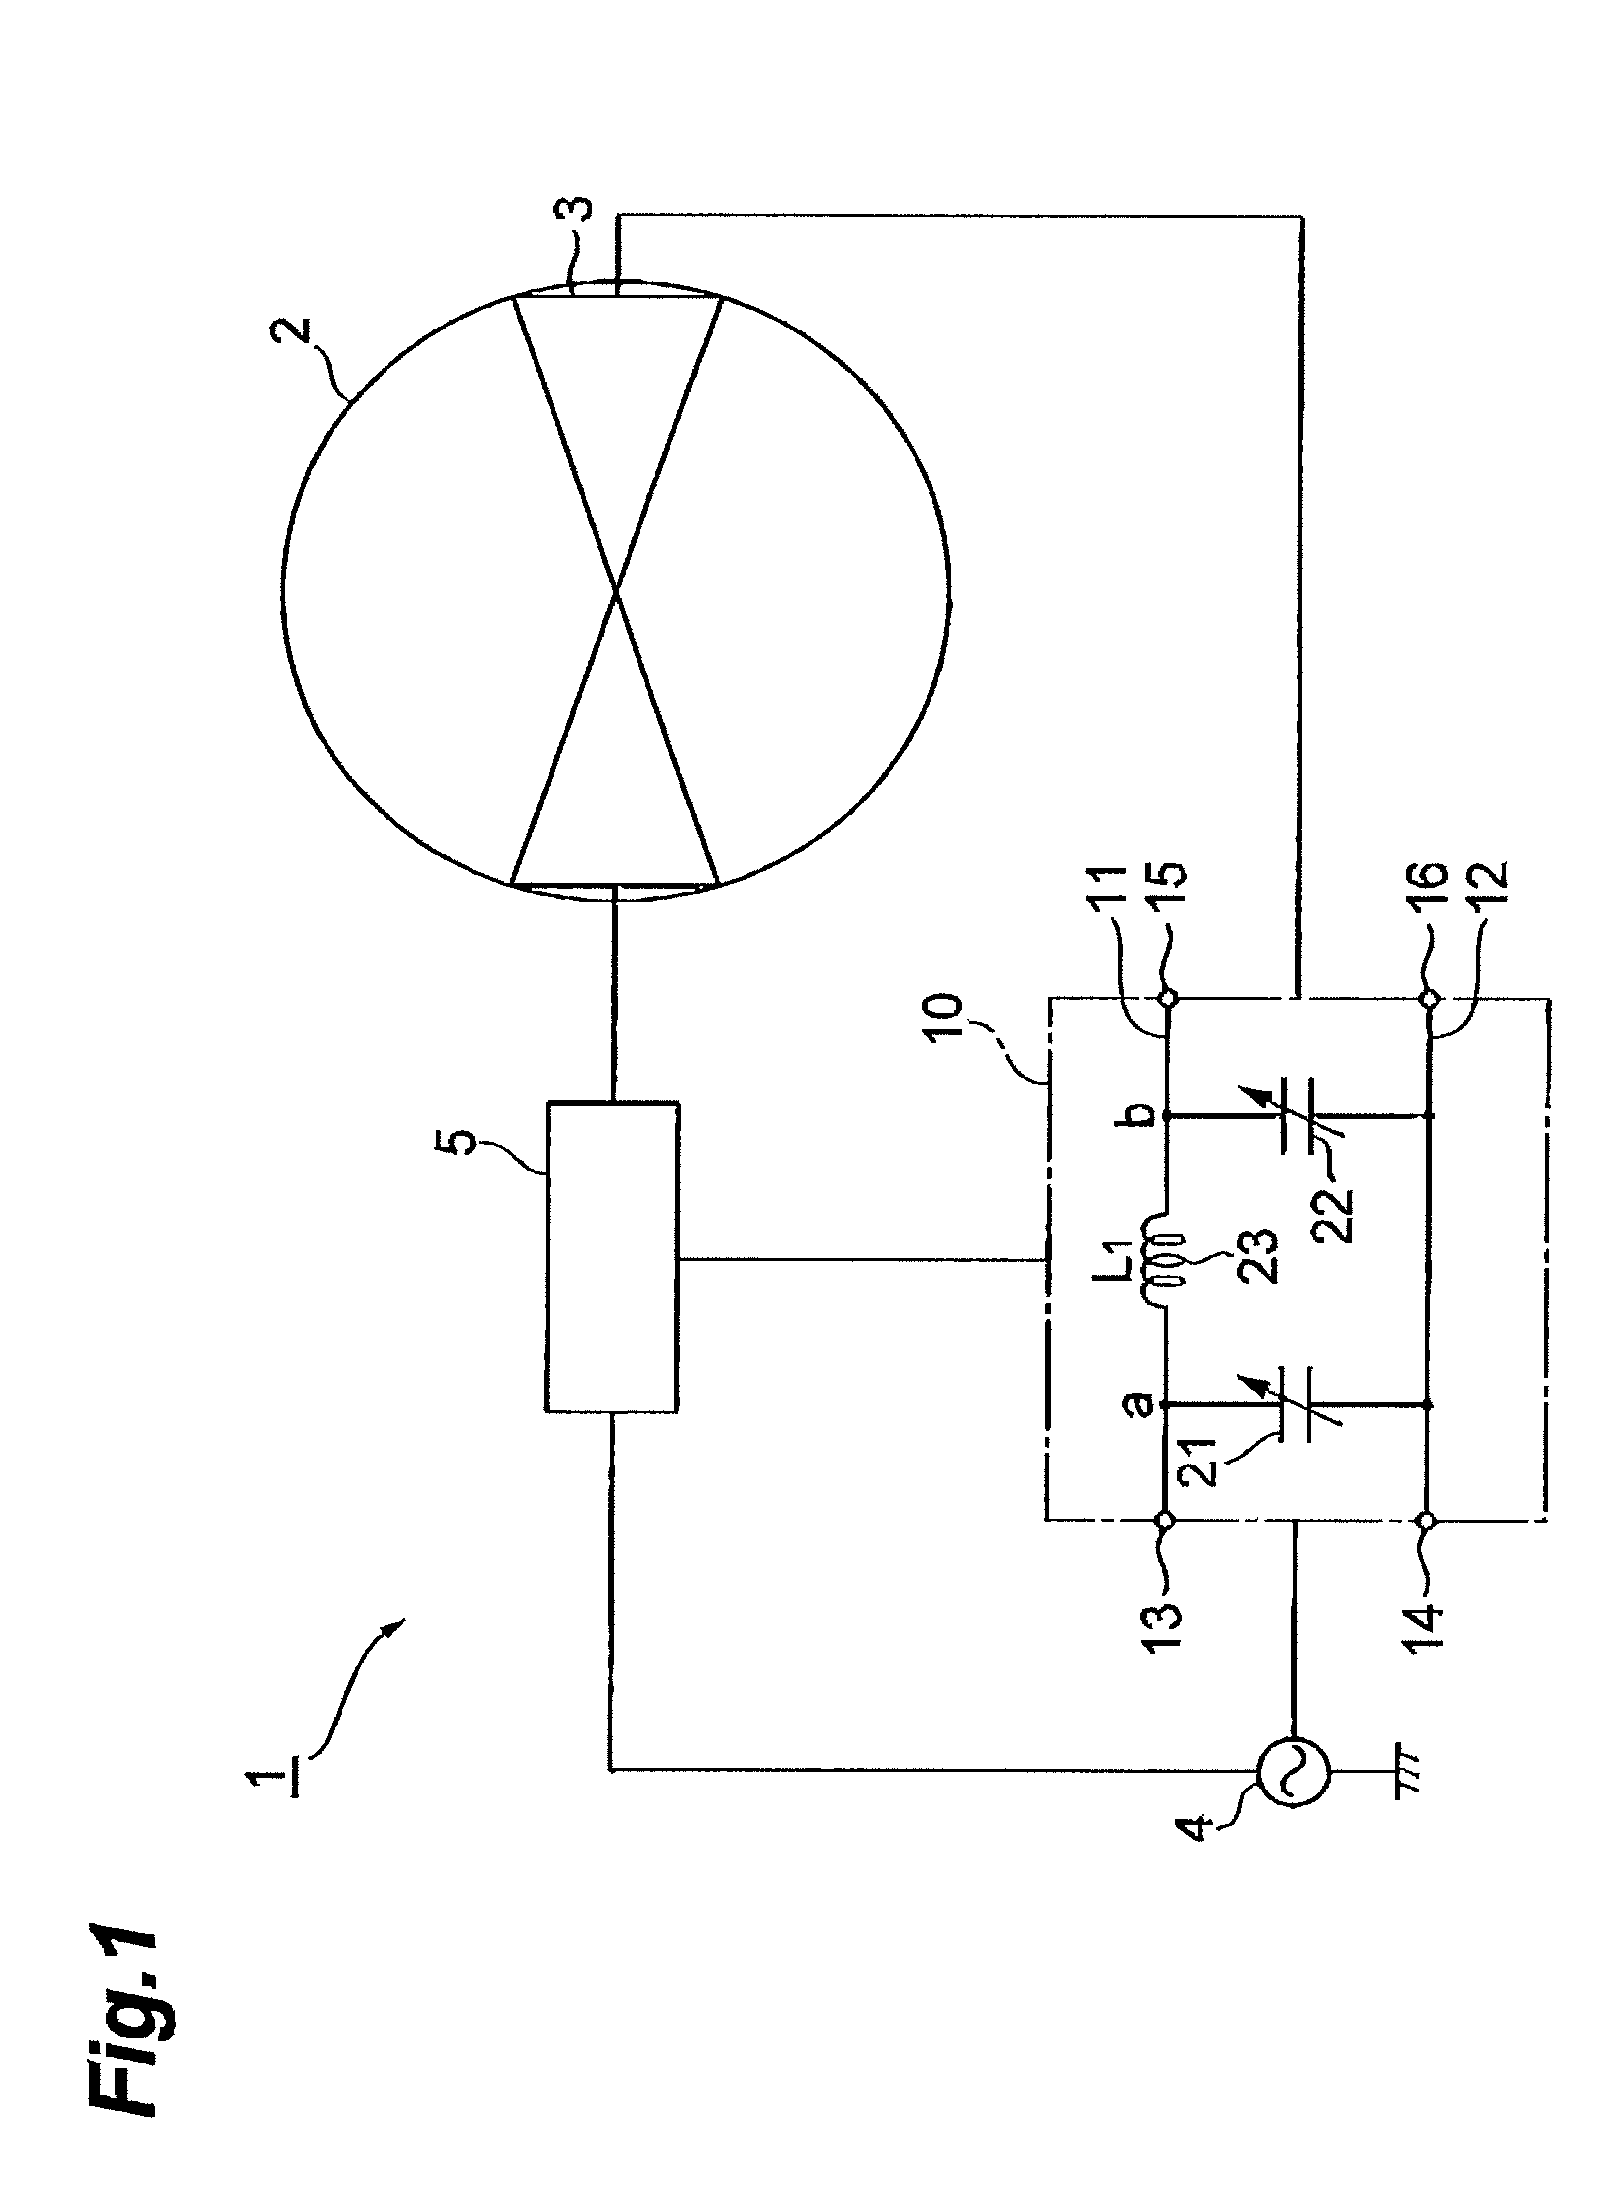 Particle accelerator and charged particle beam irradiation apparatus including particle accelerator